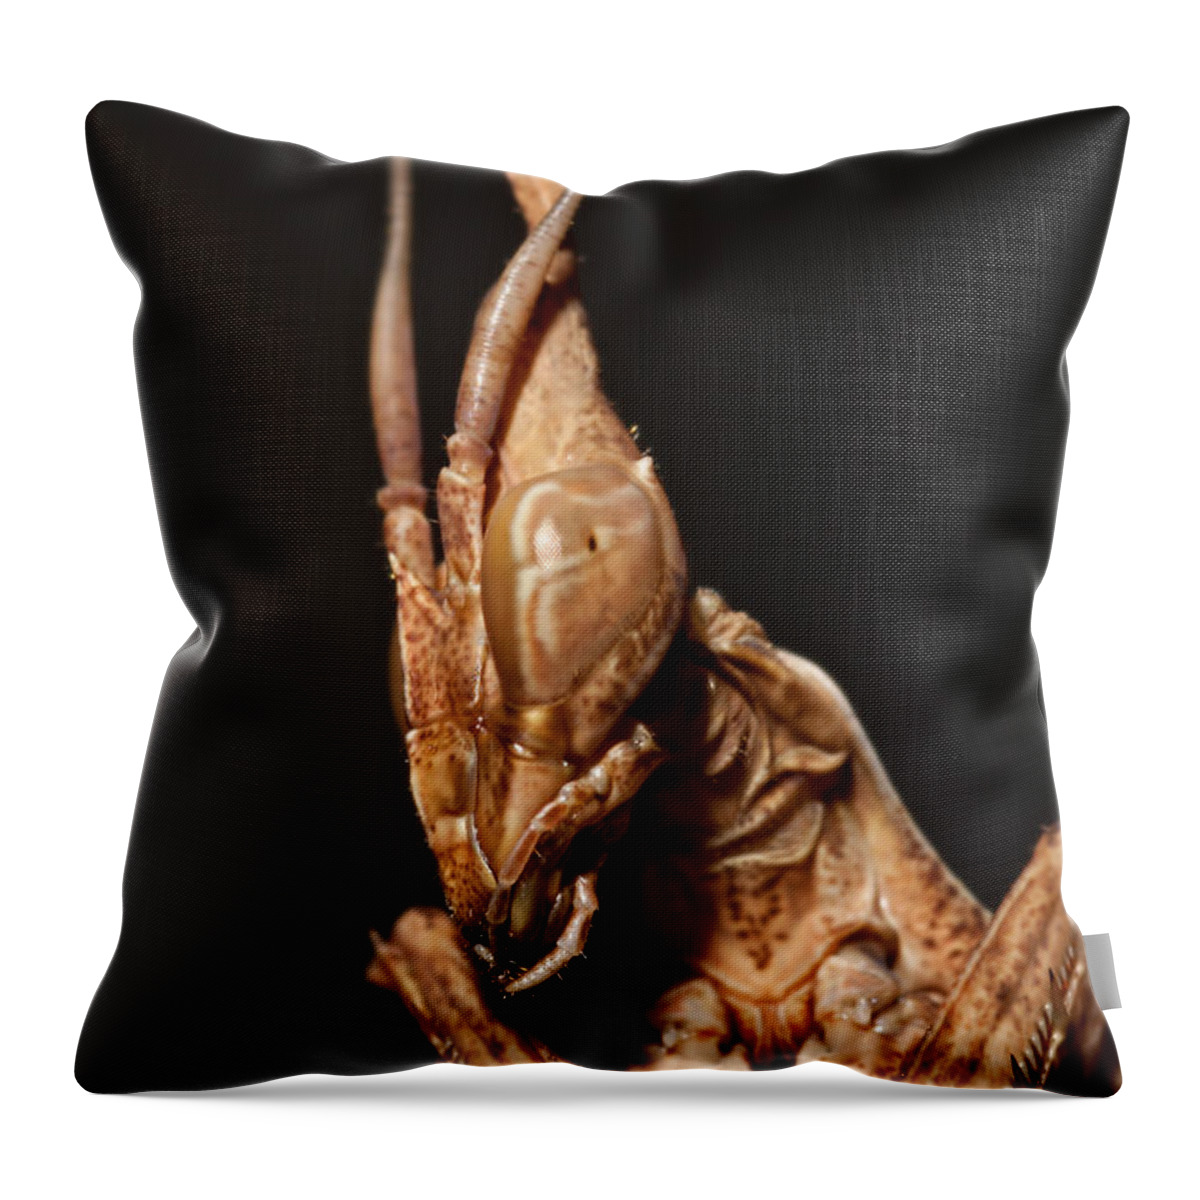 African Mantis Throw Pillow featuring the photograph Wandering Violin Mantis by Joerg Lingnau